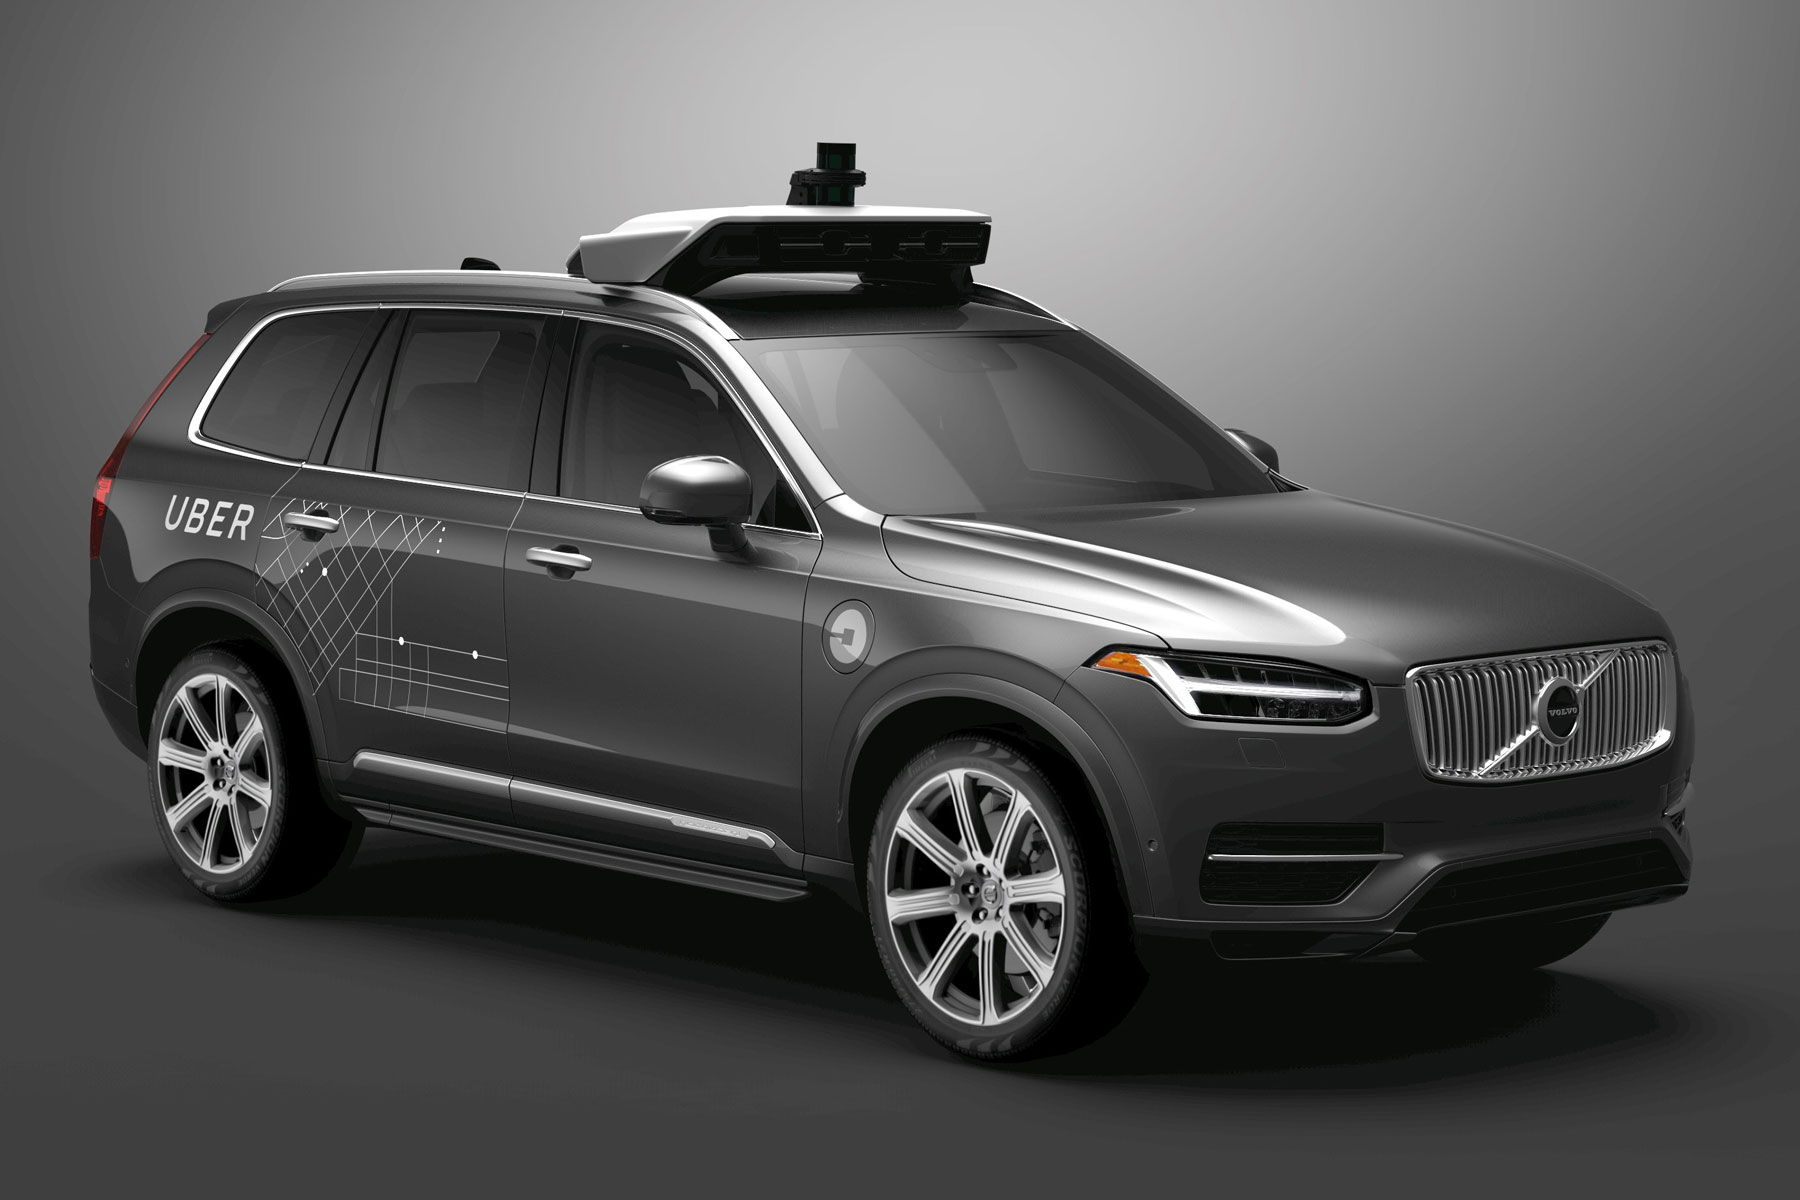 Volvo is supplying Uber with 24,000 self-driving cars